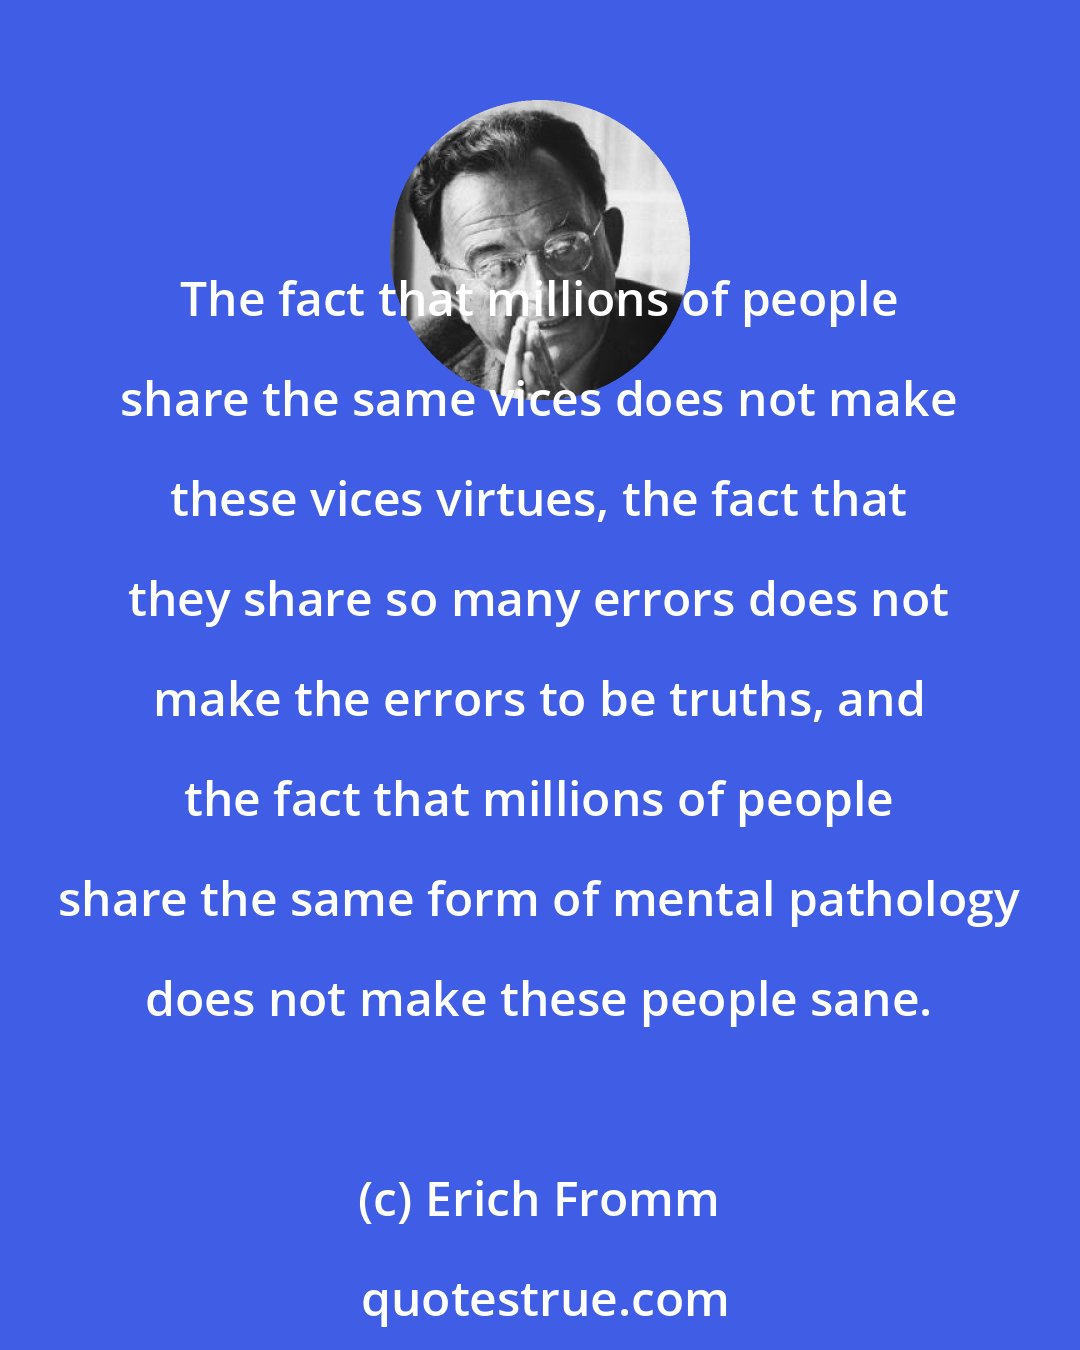 Erich Fromm: The fact that millions of people share the same vices does not make these vices virtues, the fact that they share so many errors does not make the errors to be truths, and the fact that millions of people share the same form of mental pathology does not make these people sane.